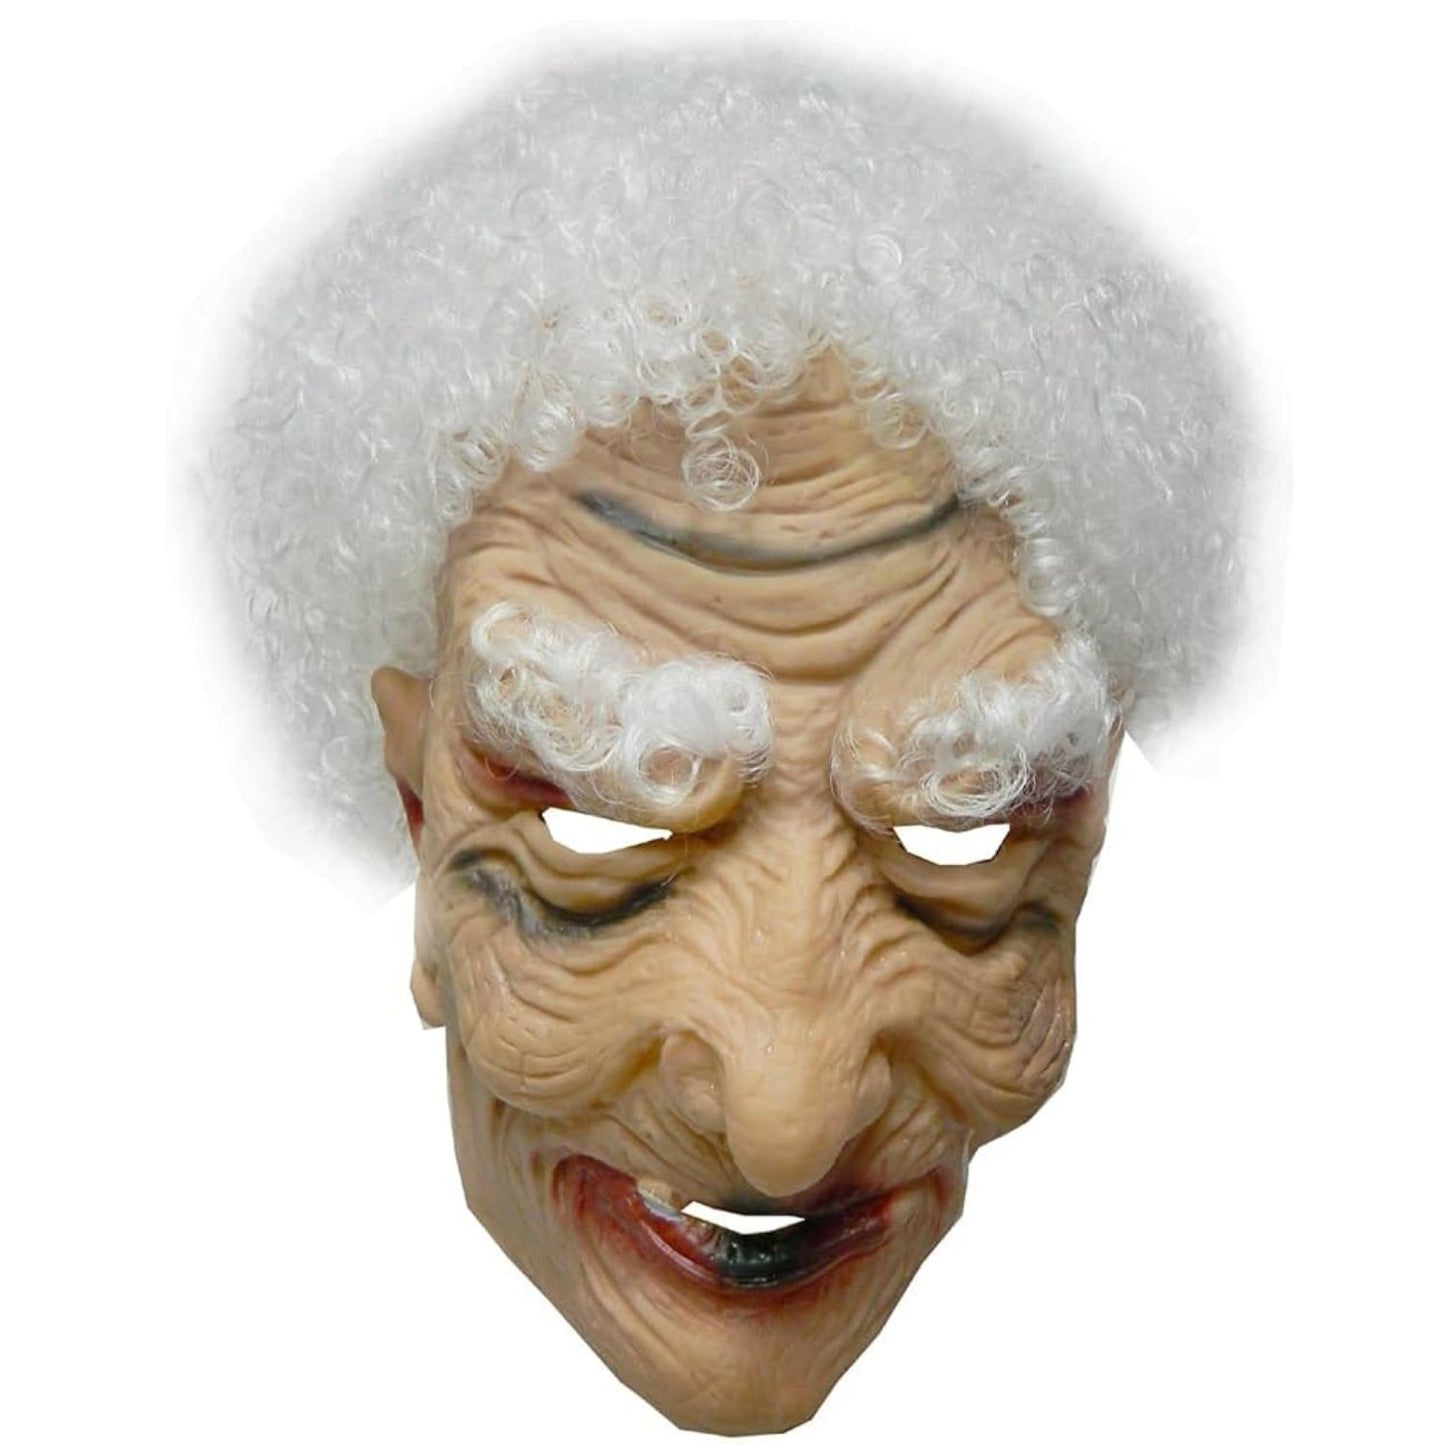 MM TOYS Old Man Horror Halloween Mask – Realistic Detail, Ultra-Soft Silicone, Comfort Fit, Adult Size, Creepy